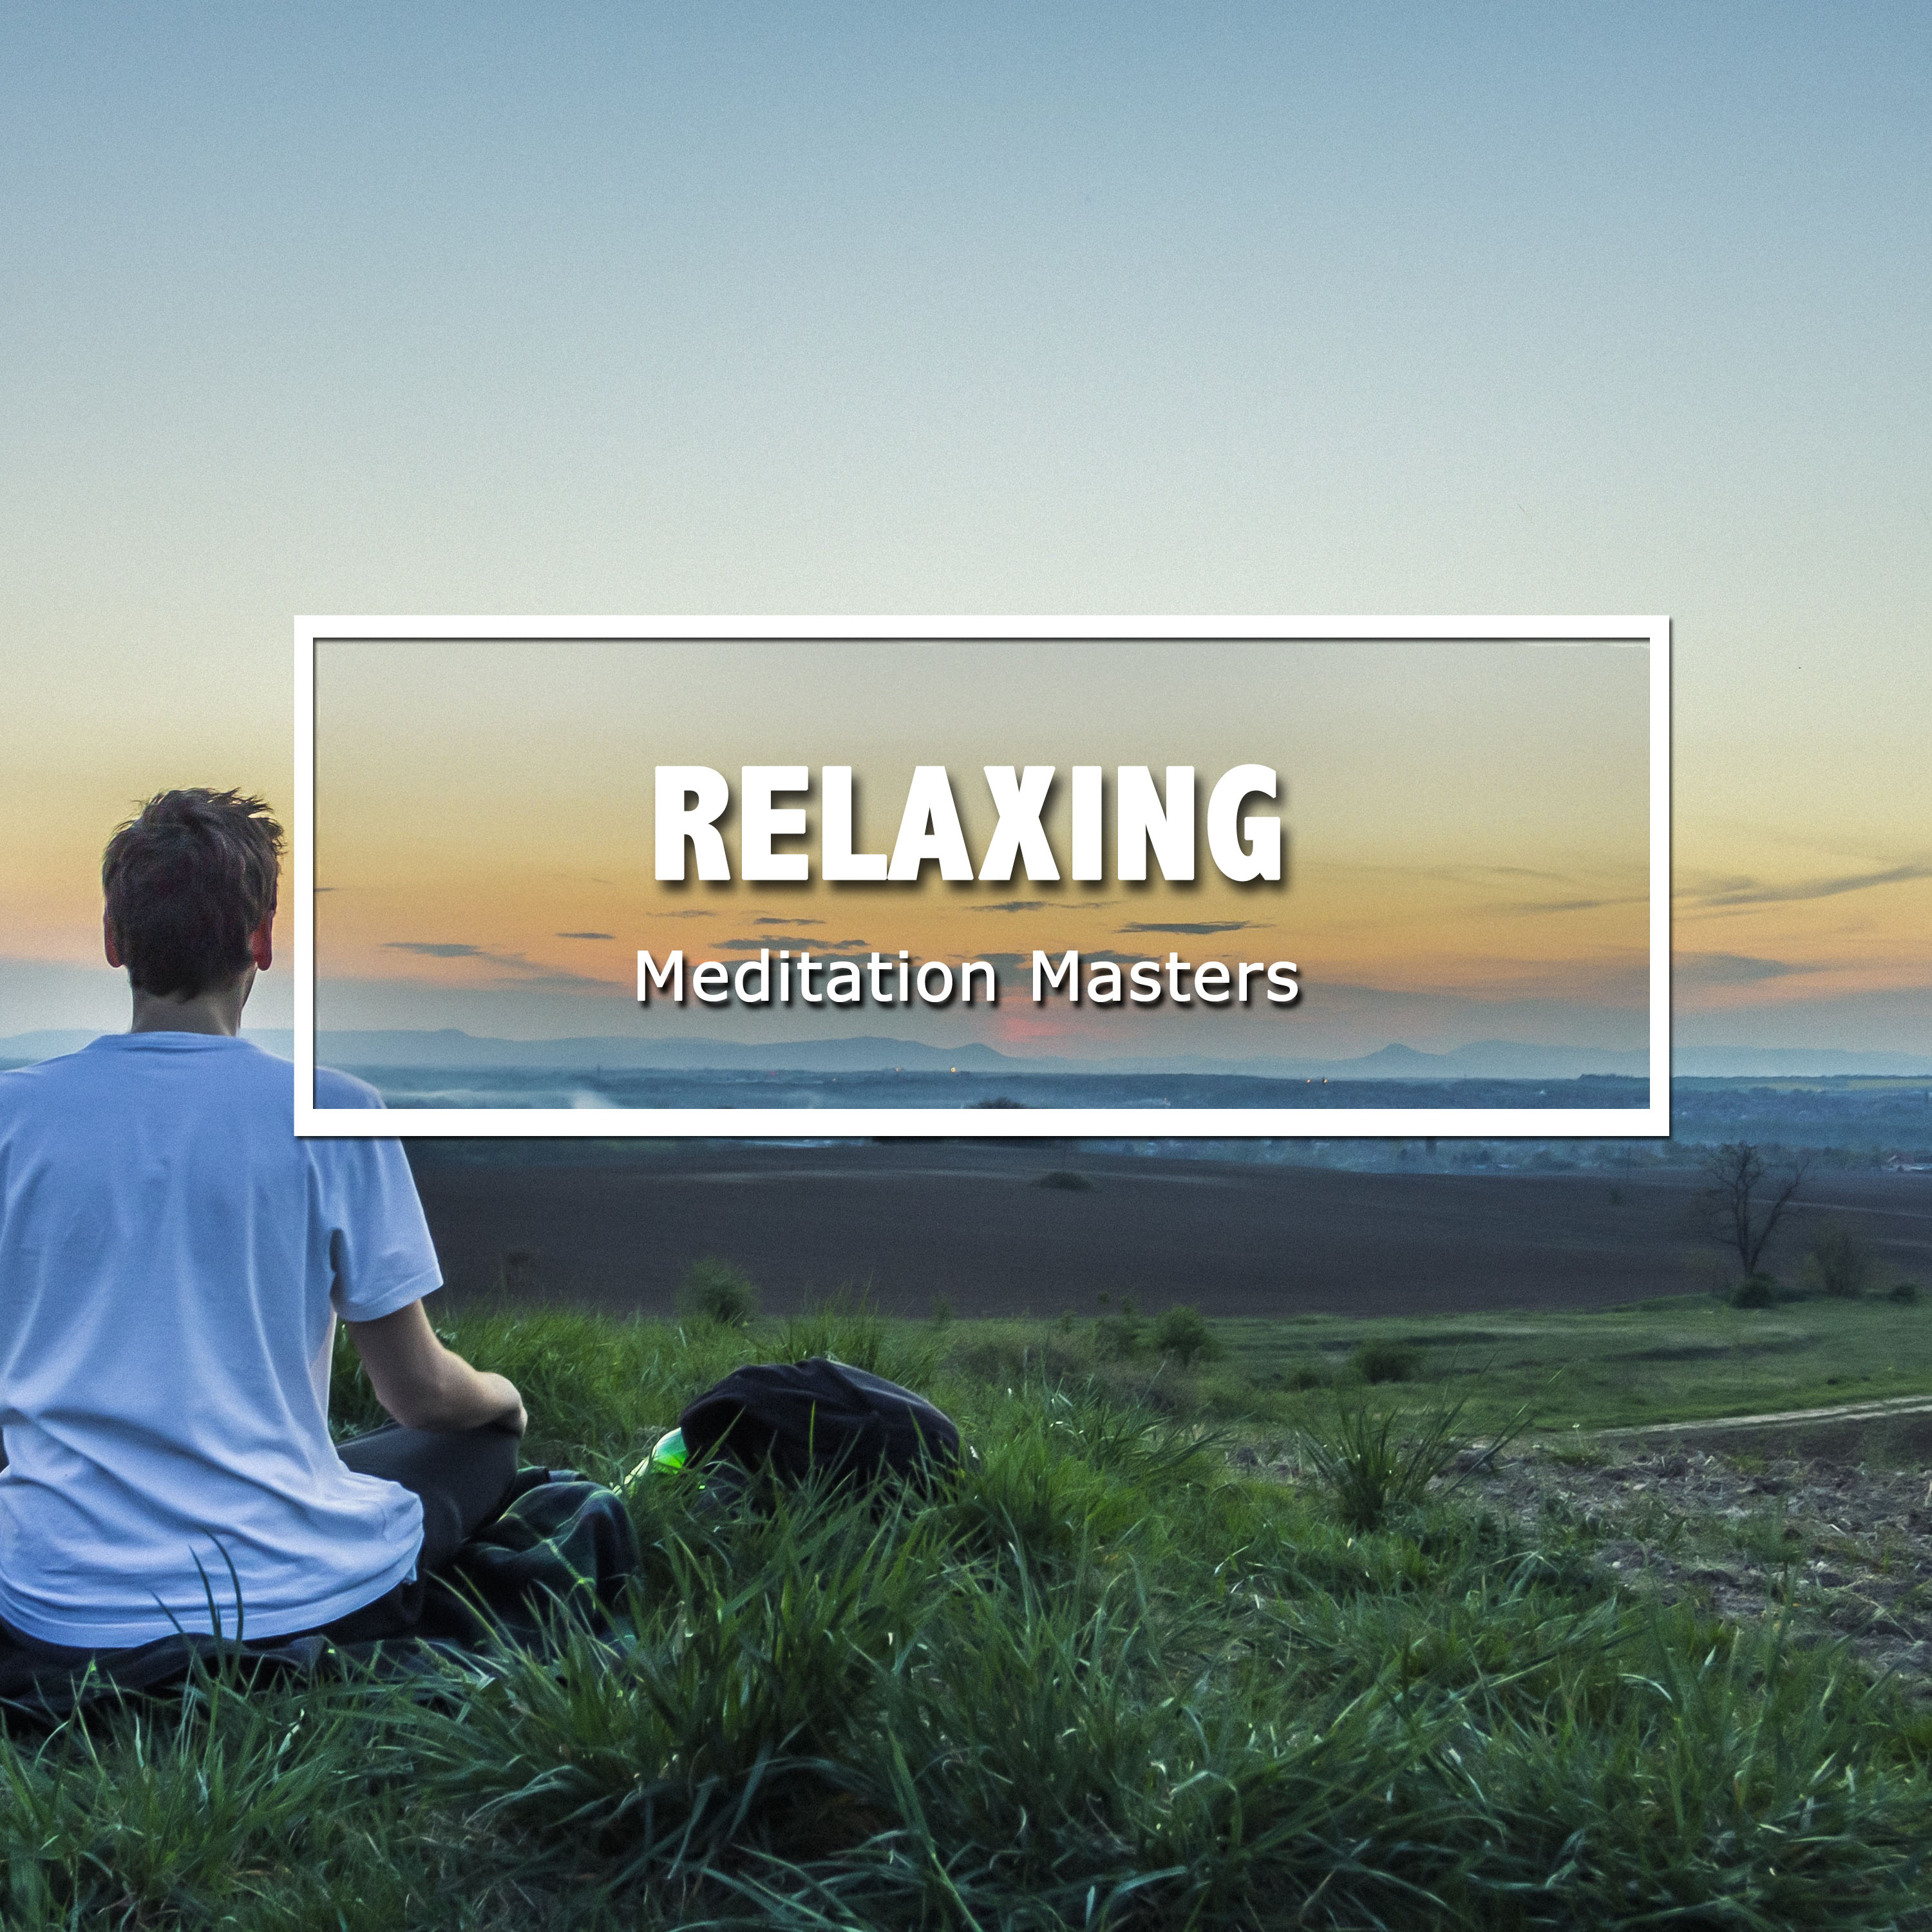 10 Relaxing Meditation Masters